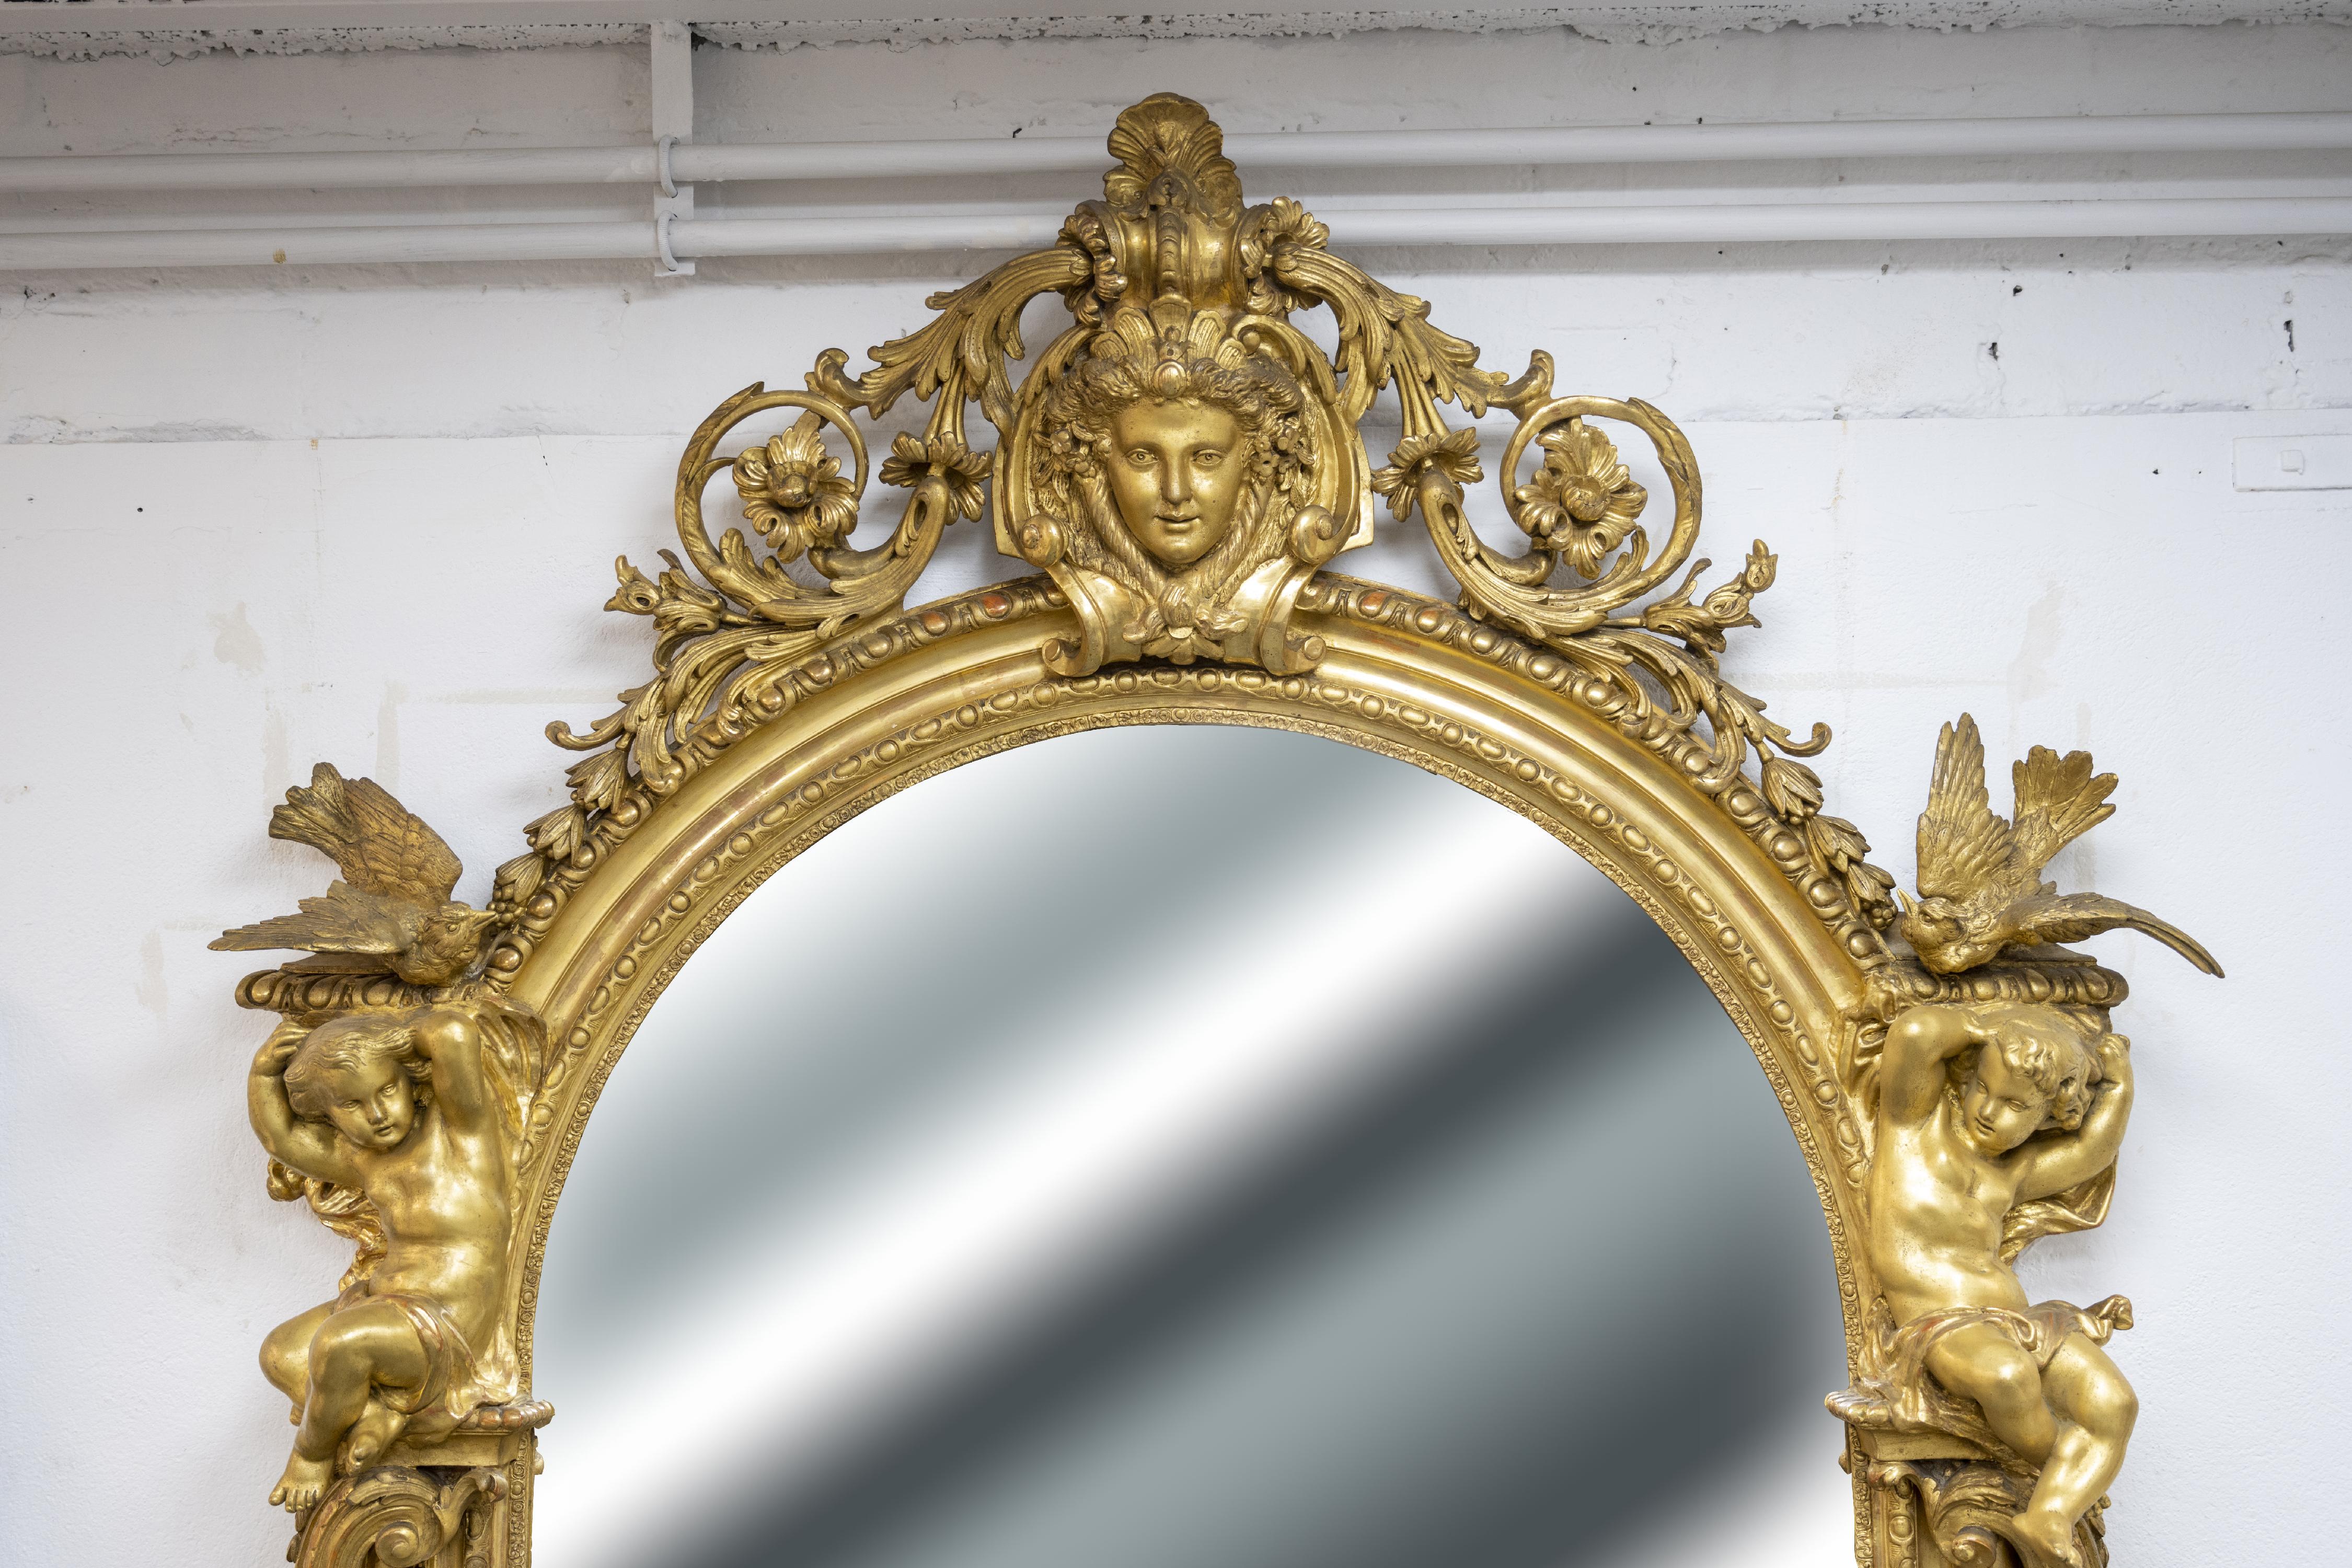 This sumptuous gilded wood trumeau is richly decorated in the style of the Second Empire. The majestic decoration is largely inspired by the ornamental grammar of the past centuries, with scrolls, neoclassical friezes, acanthus leaves and beaded